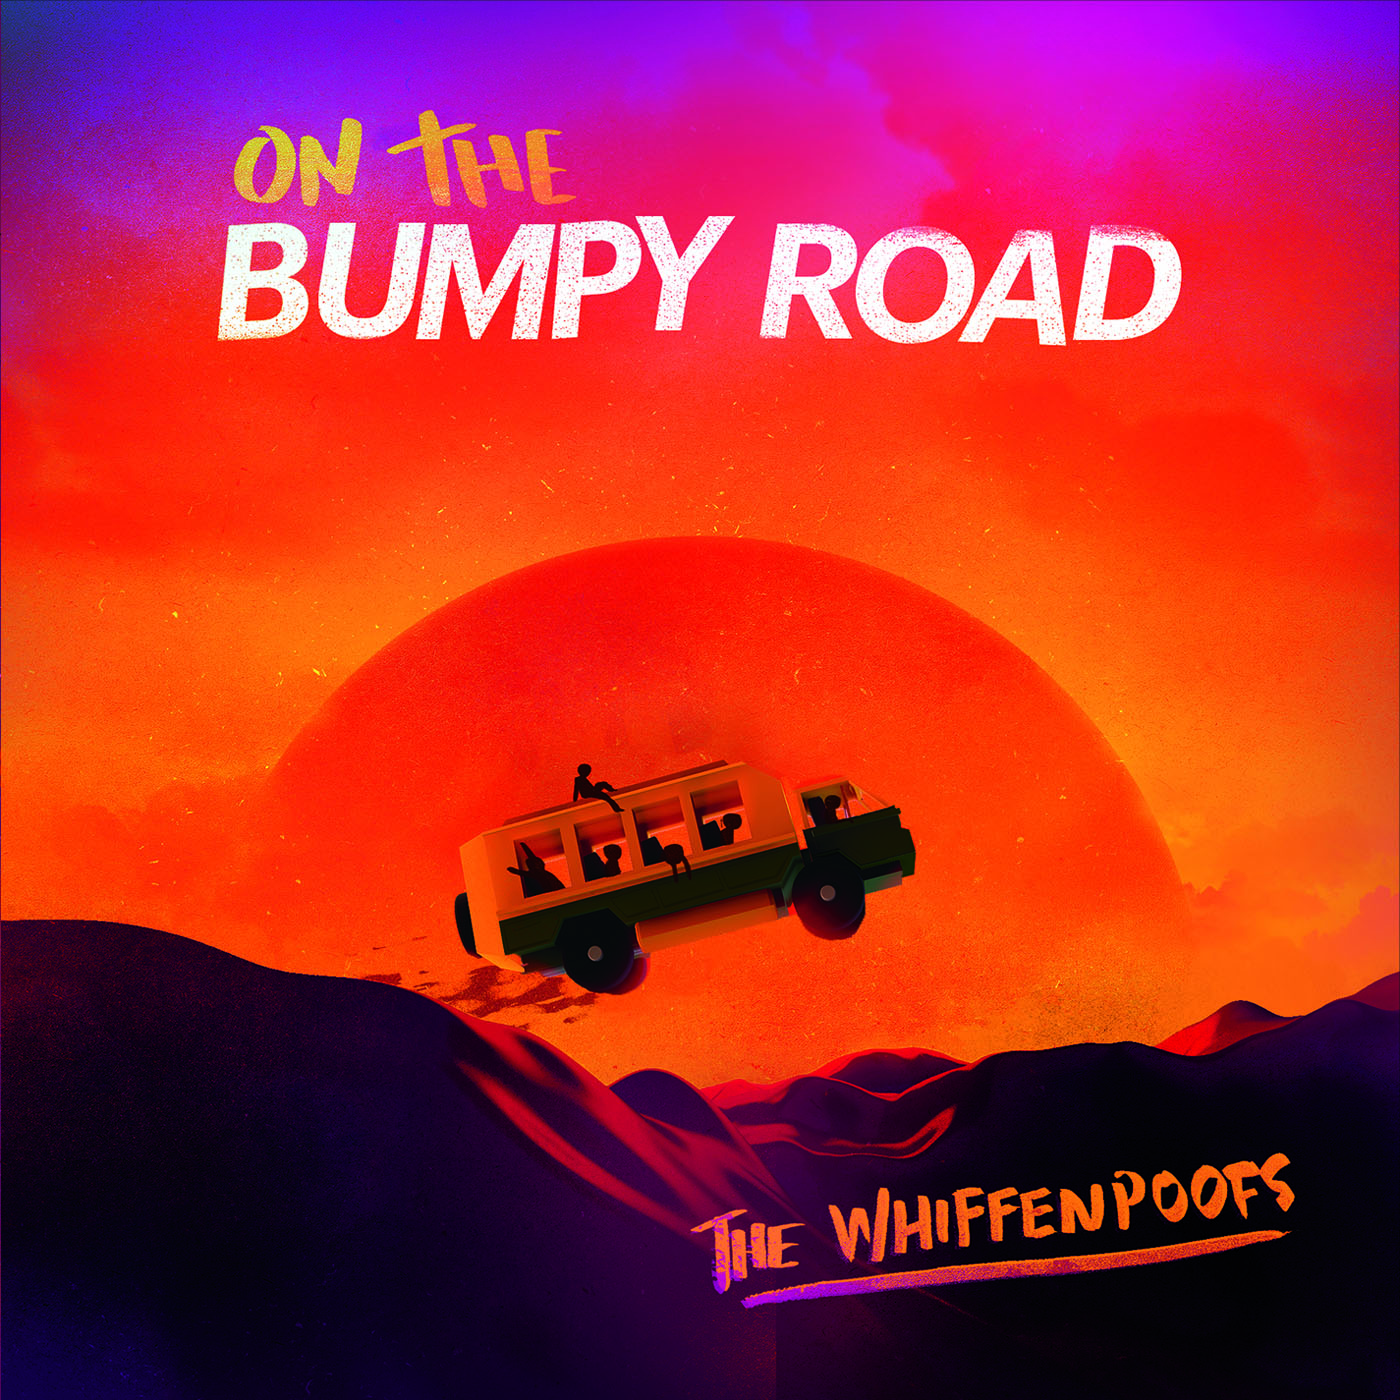 On the Bumpy Road, 2017